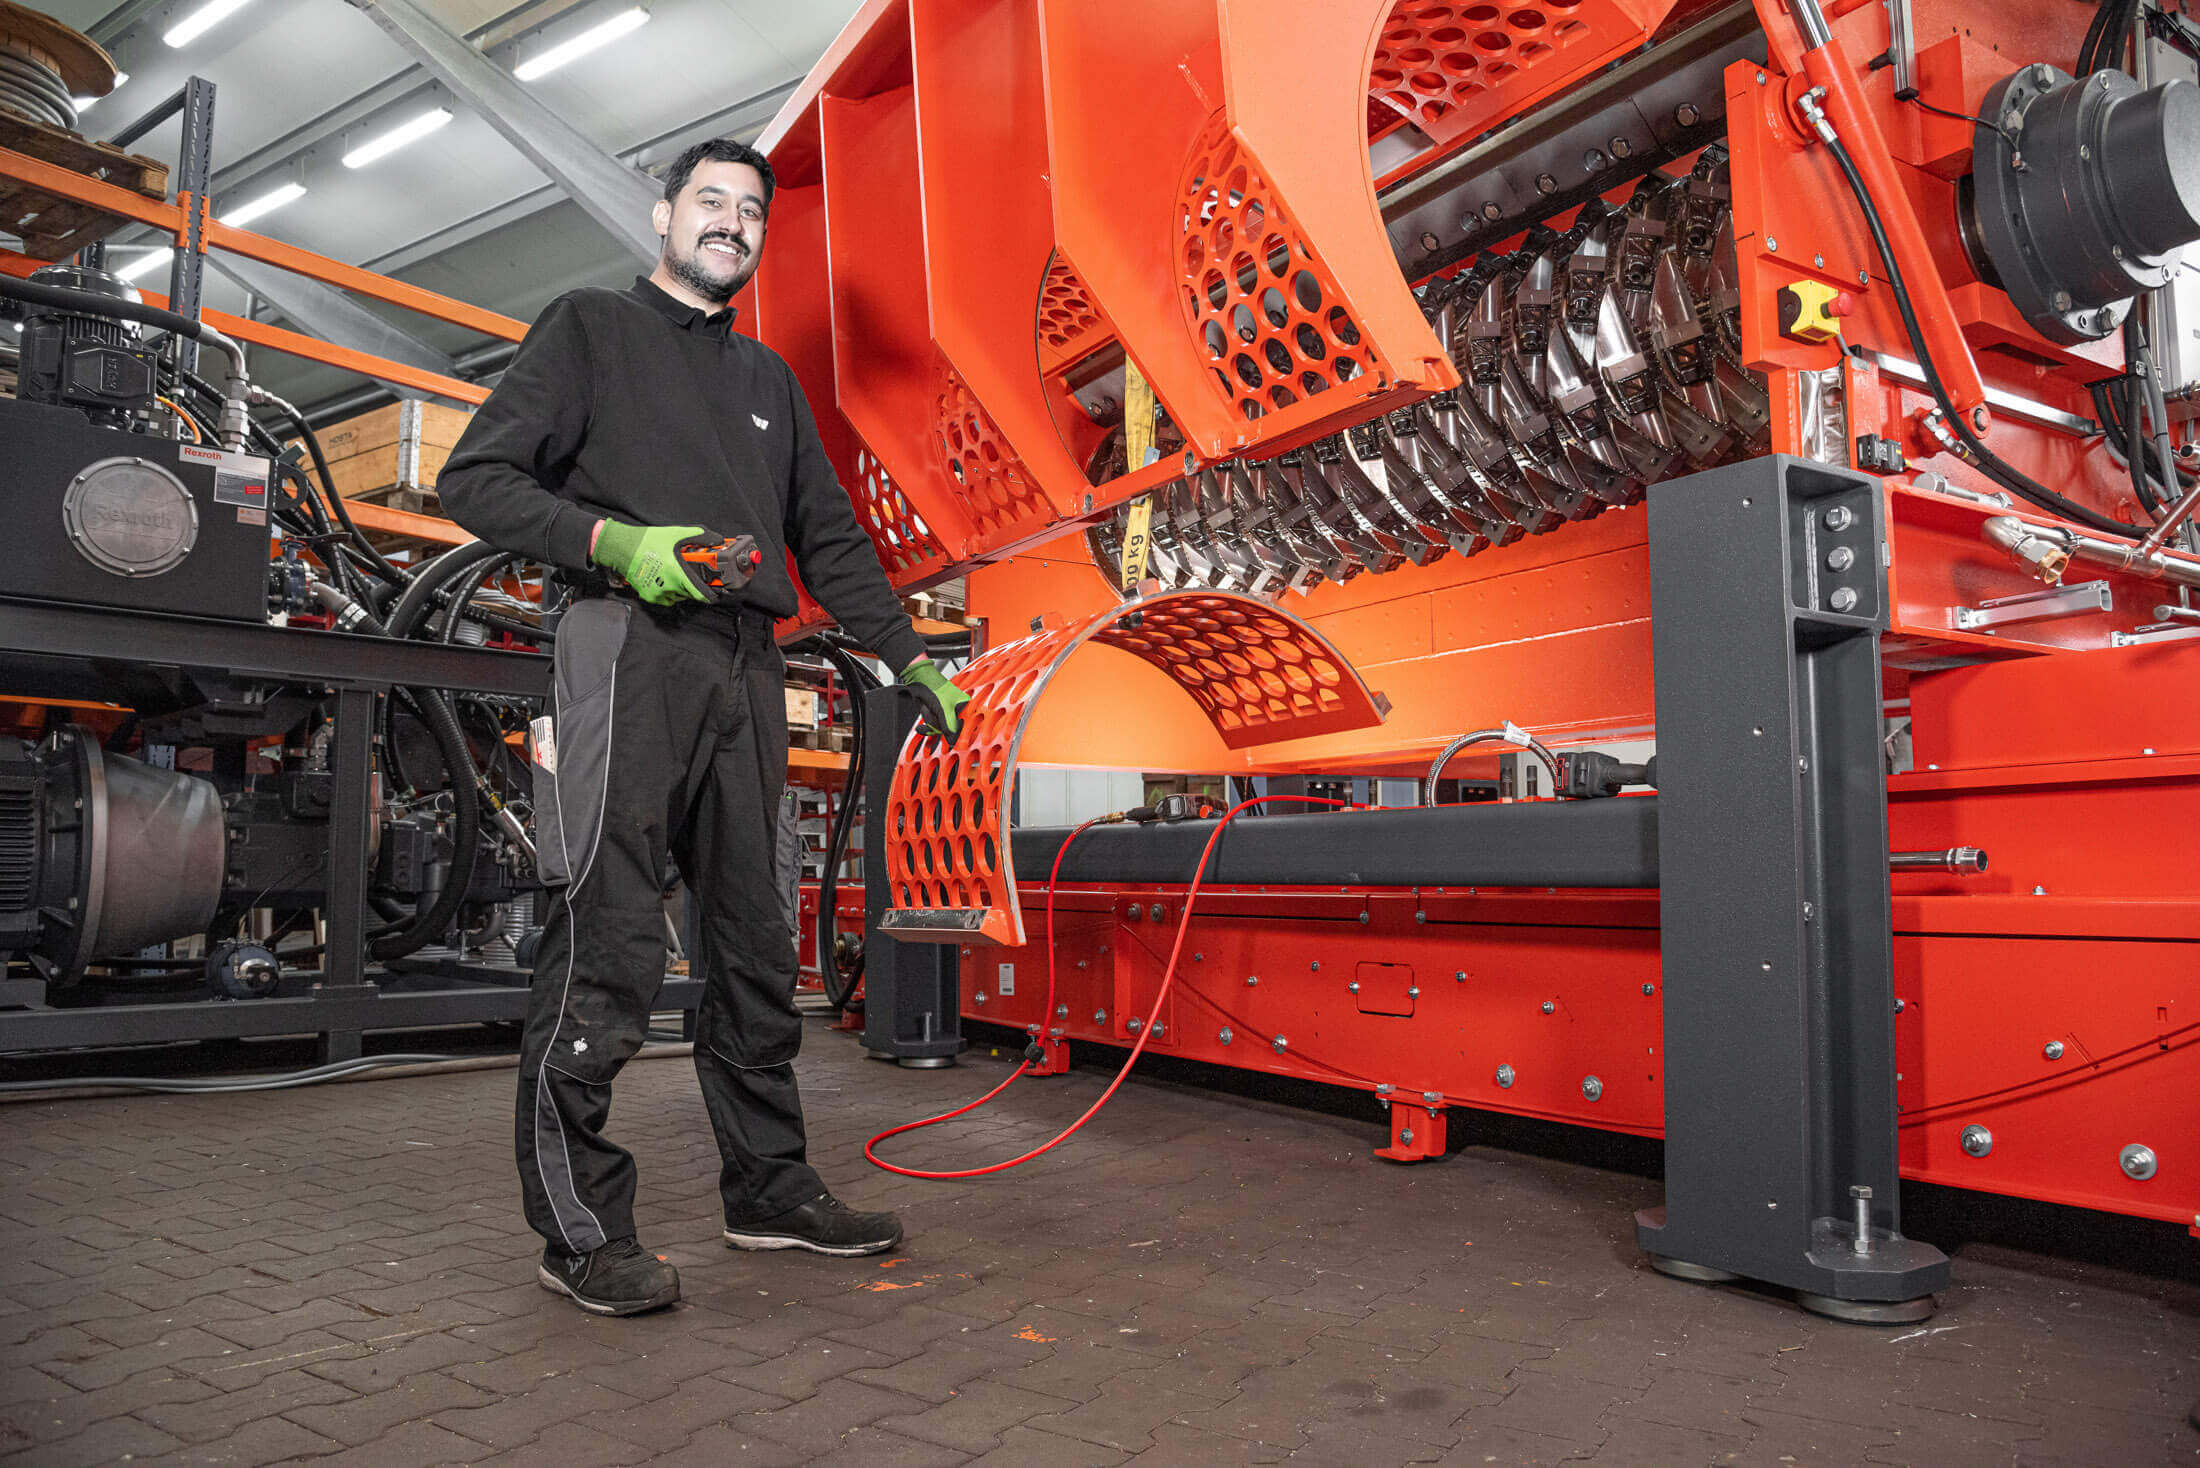 Mechanic with WEIMA clothing in front of an orange shredder